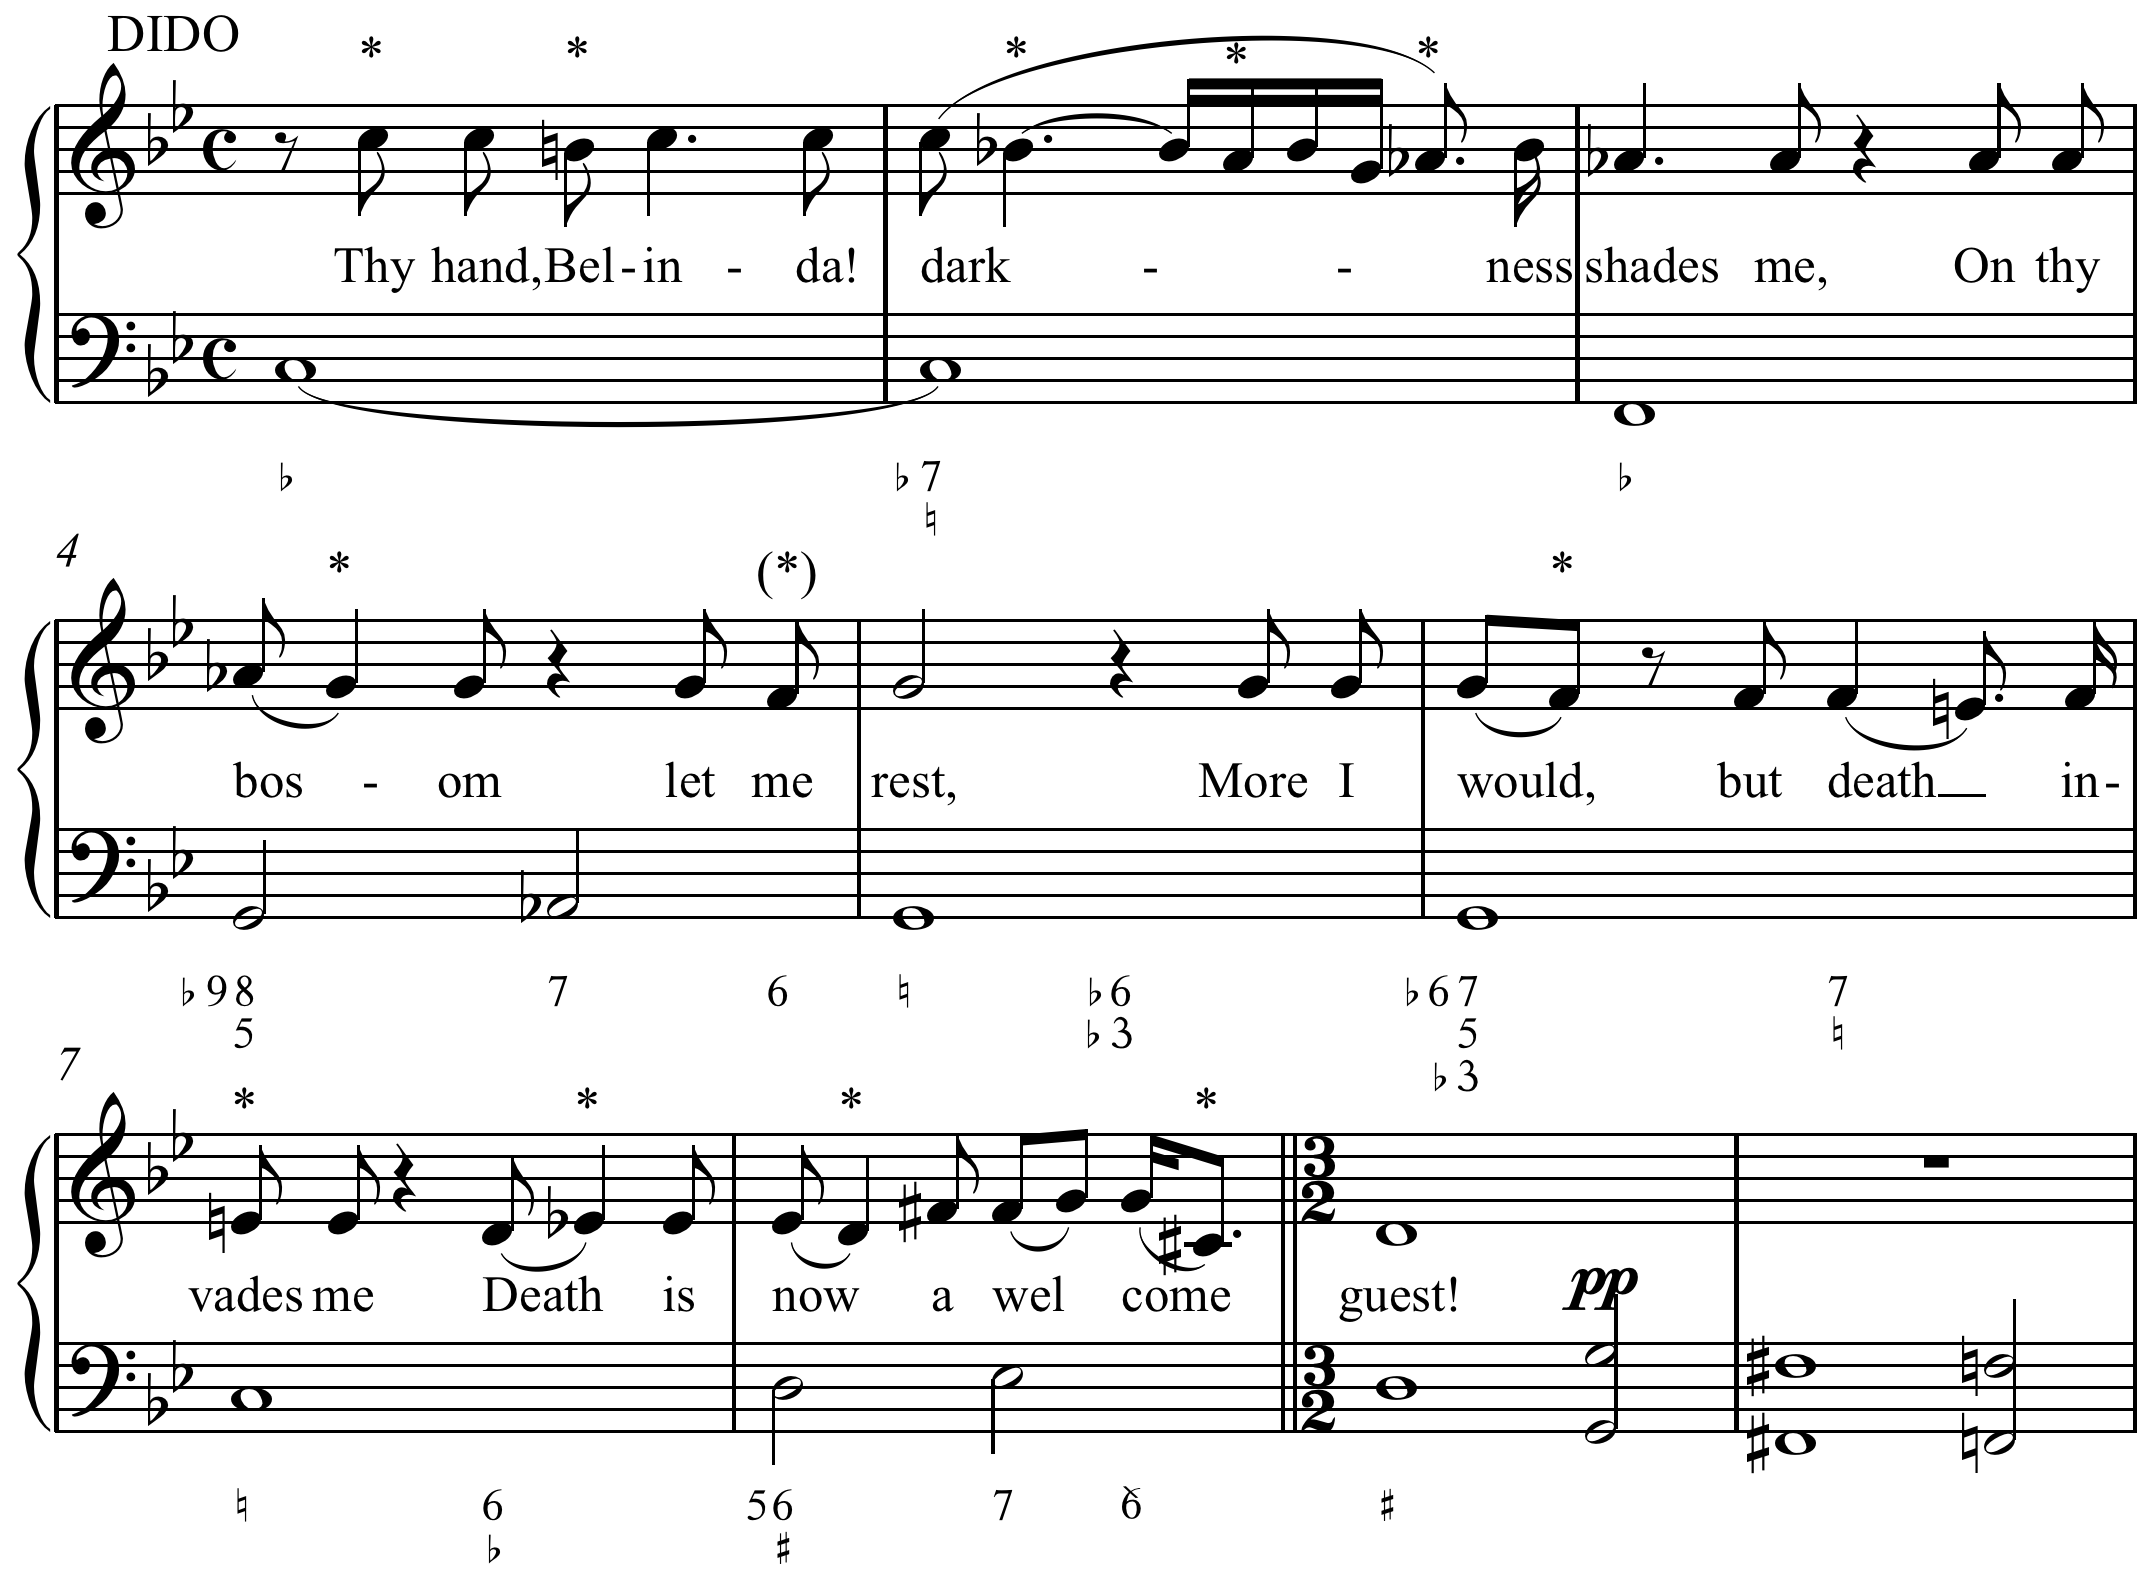 Figured bass example from "Thy Hand, Belinda" from Dido and Aeneas opera.